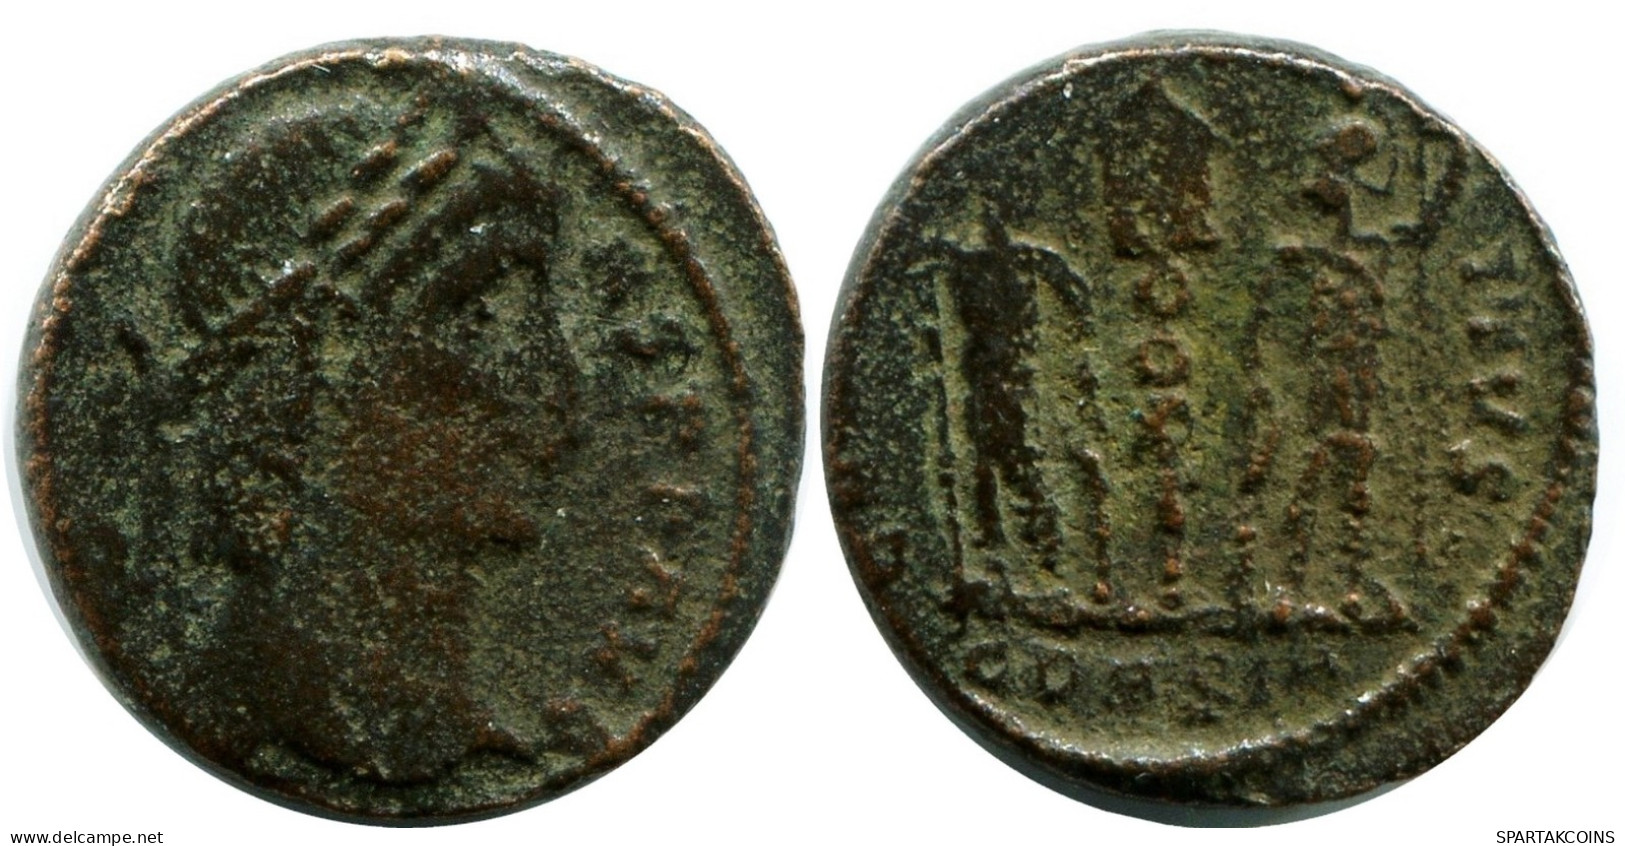 CONSTANS MINTED IN CONSTANTINOPLE FOUND IN IHNASYAH HOARD EGYPT #ANC11946.14.E.A - The Christian Empire (307 AD To 363 AD)